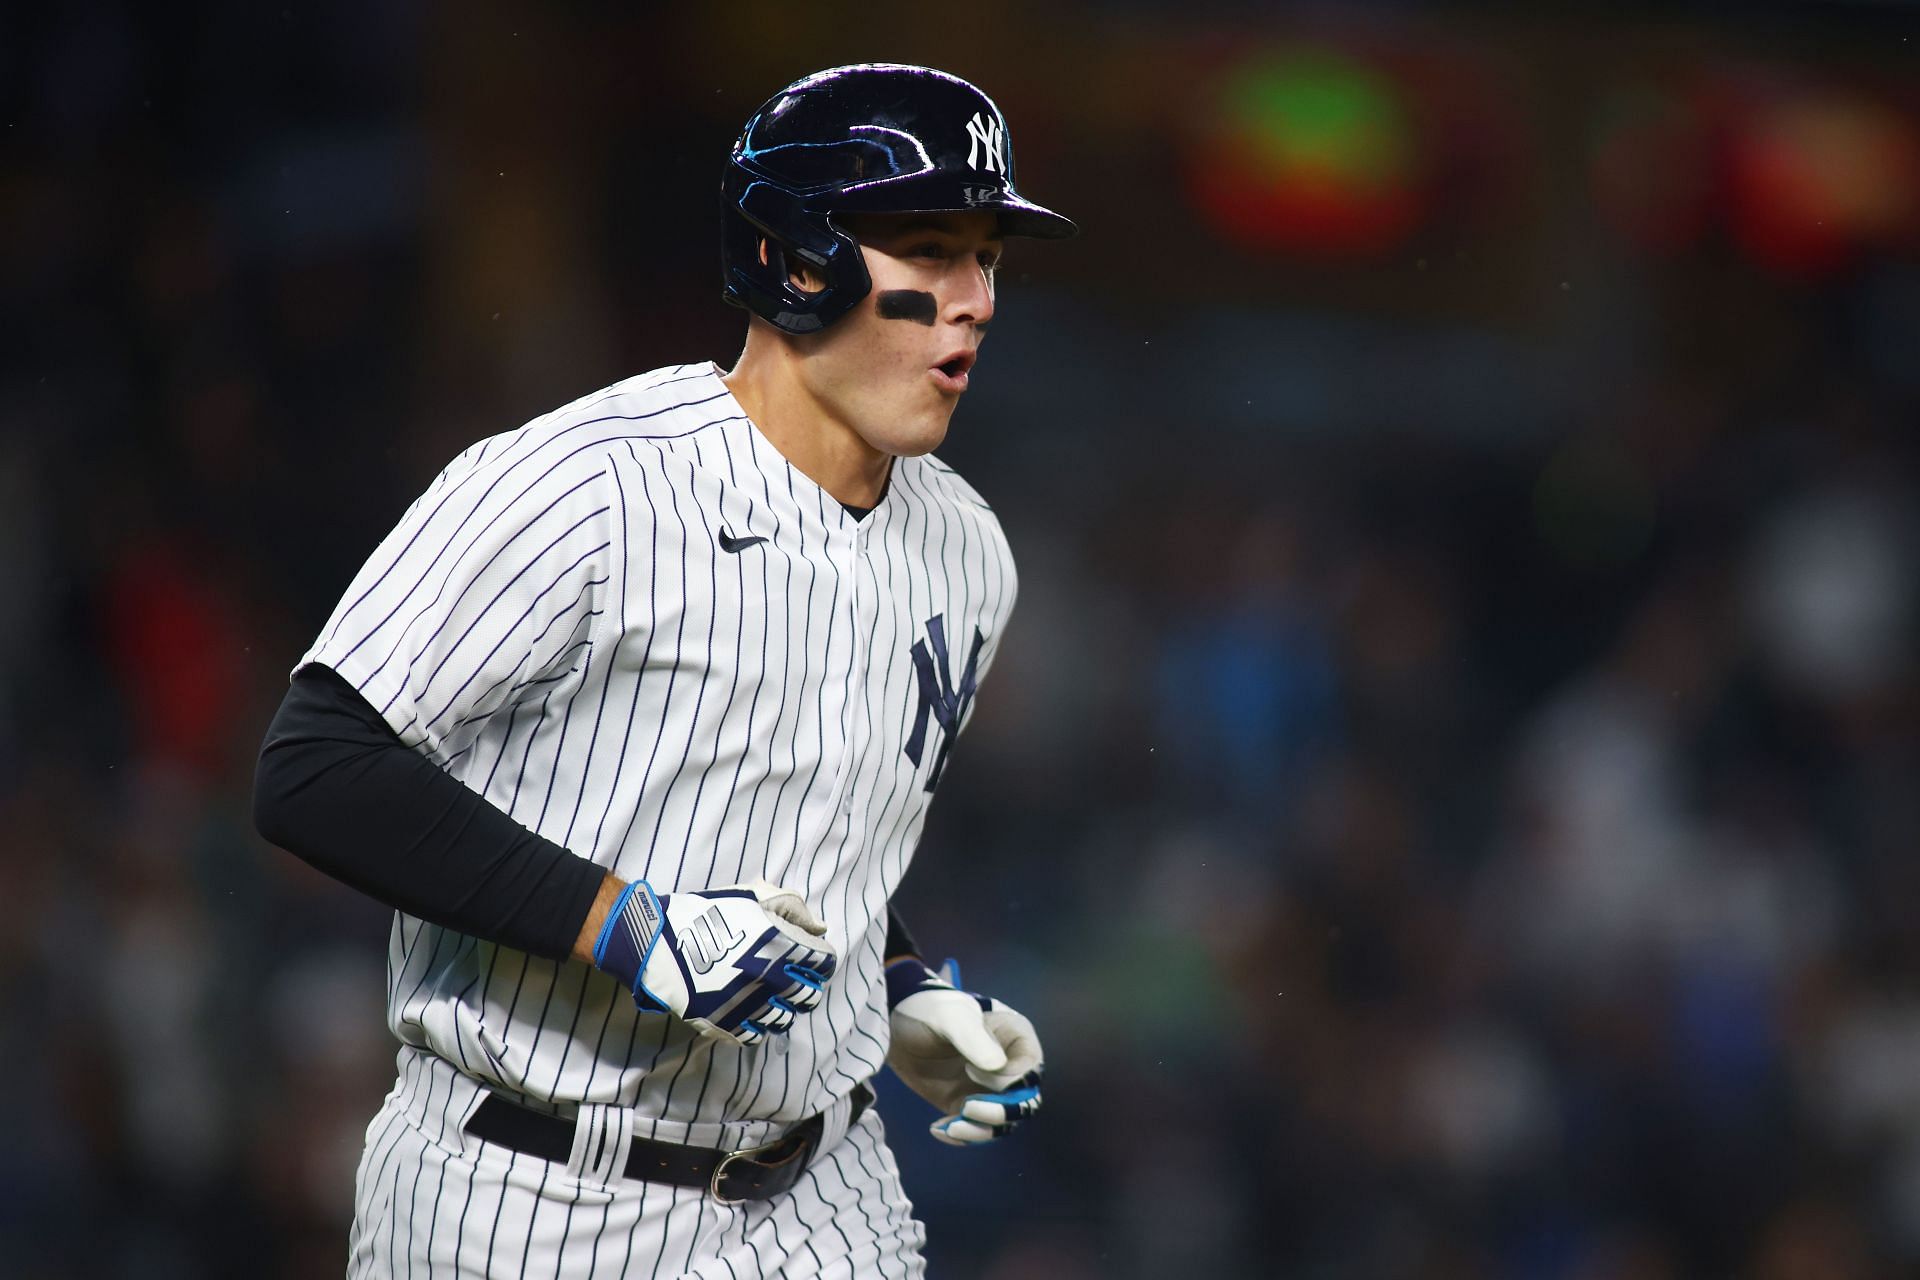 Rizzo had a historic night for the New York Yankees